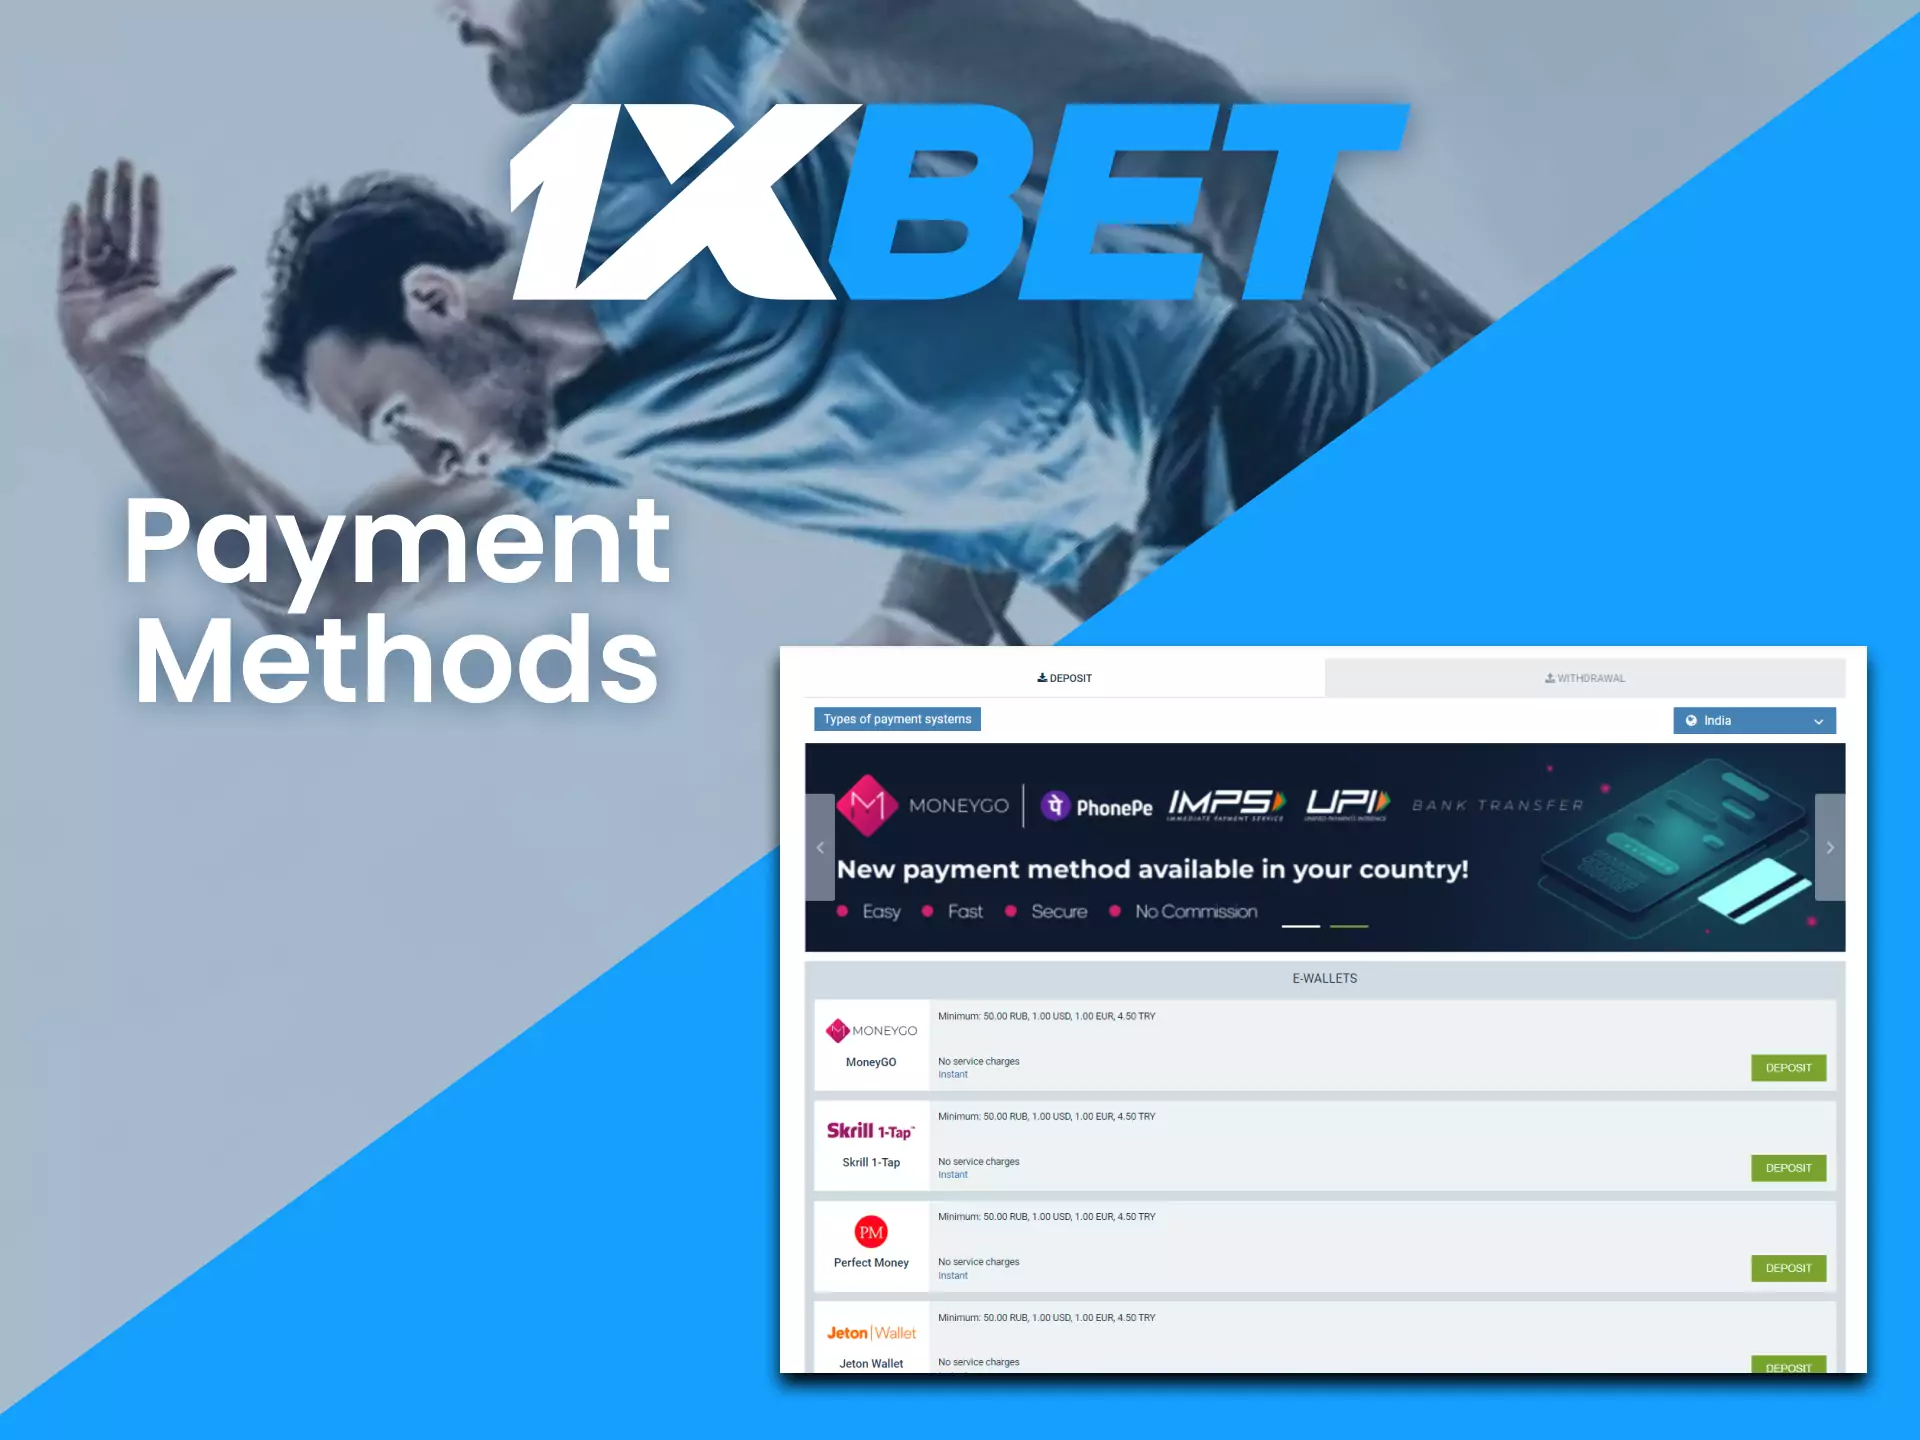 The 1xbet affiliate program uses the most common payment methods in India.